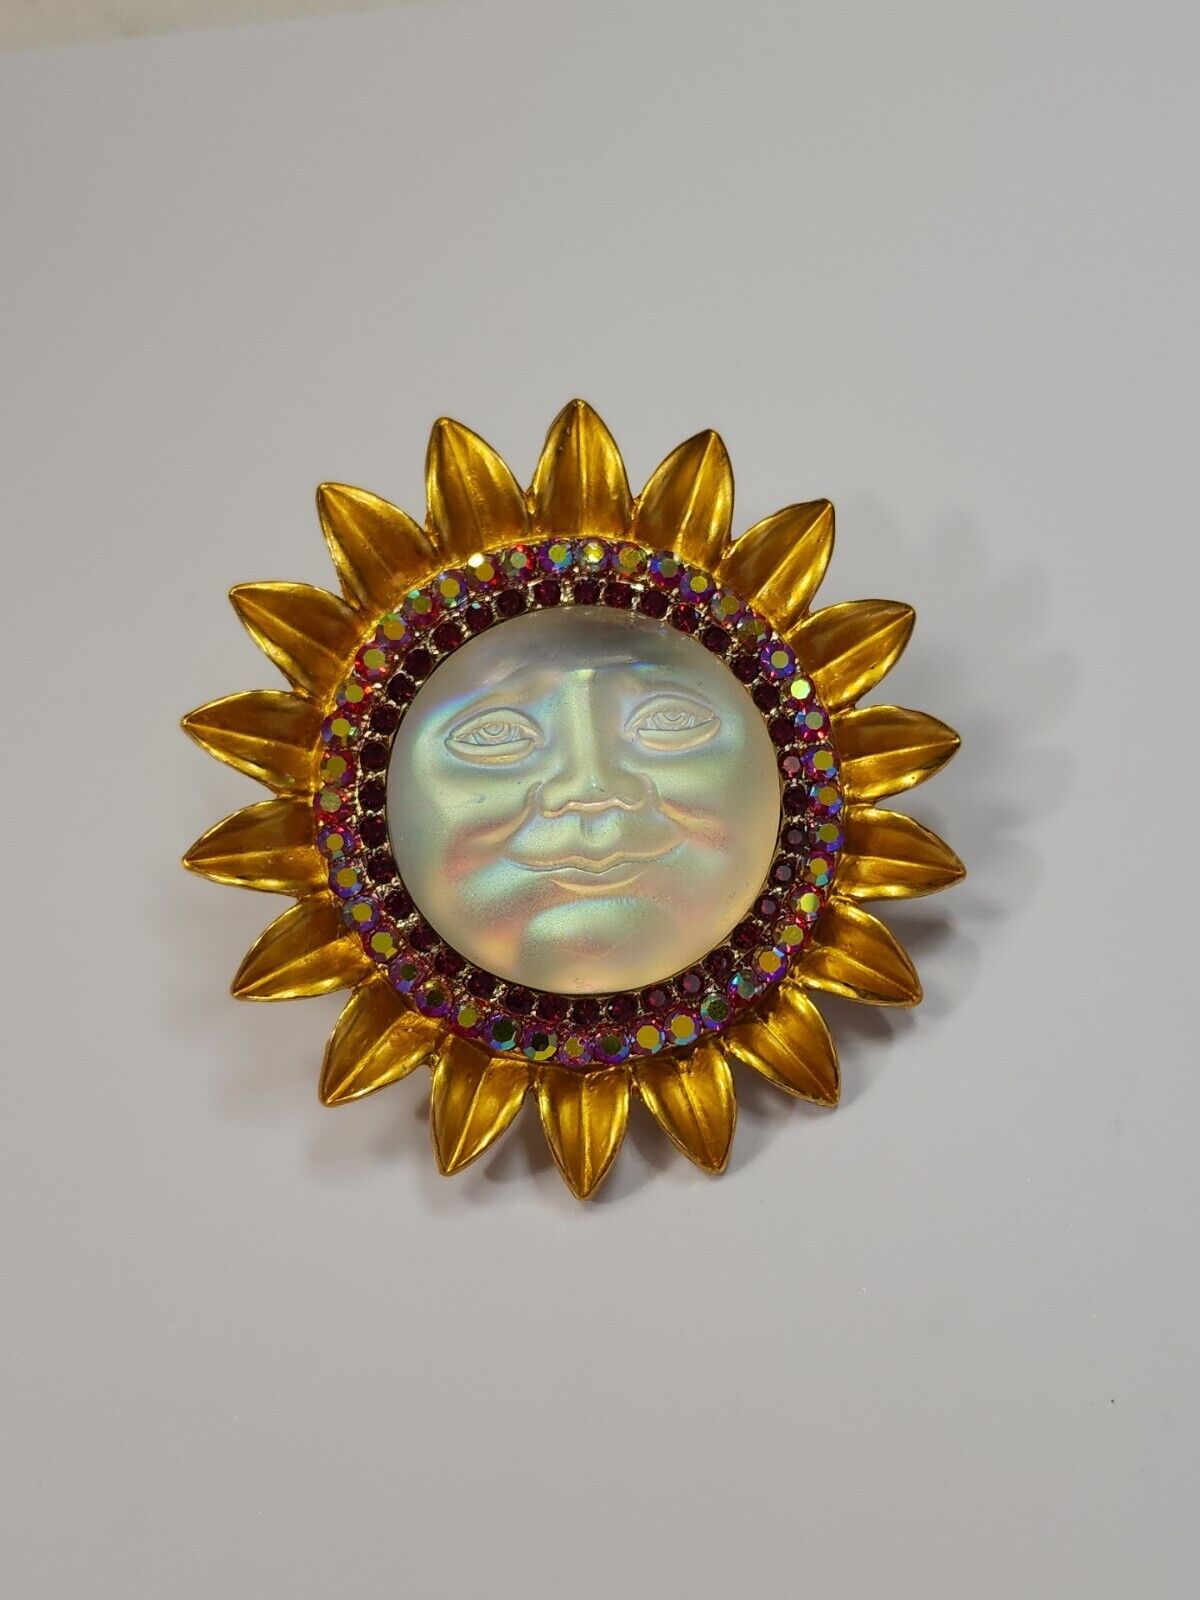 Sunflower Sun Face Brooch Lapel Pin Circle of Red & Iridescent Faceted Faux Gems